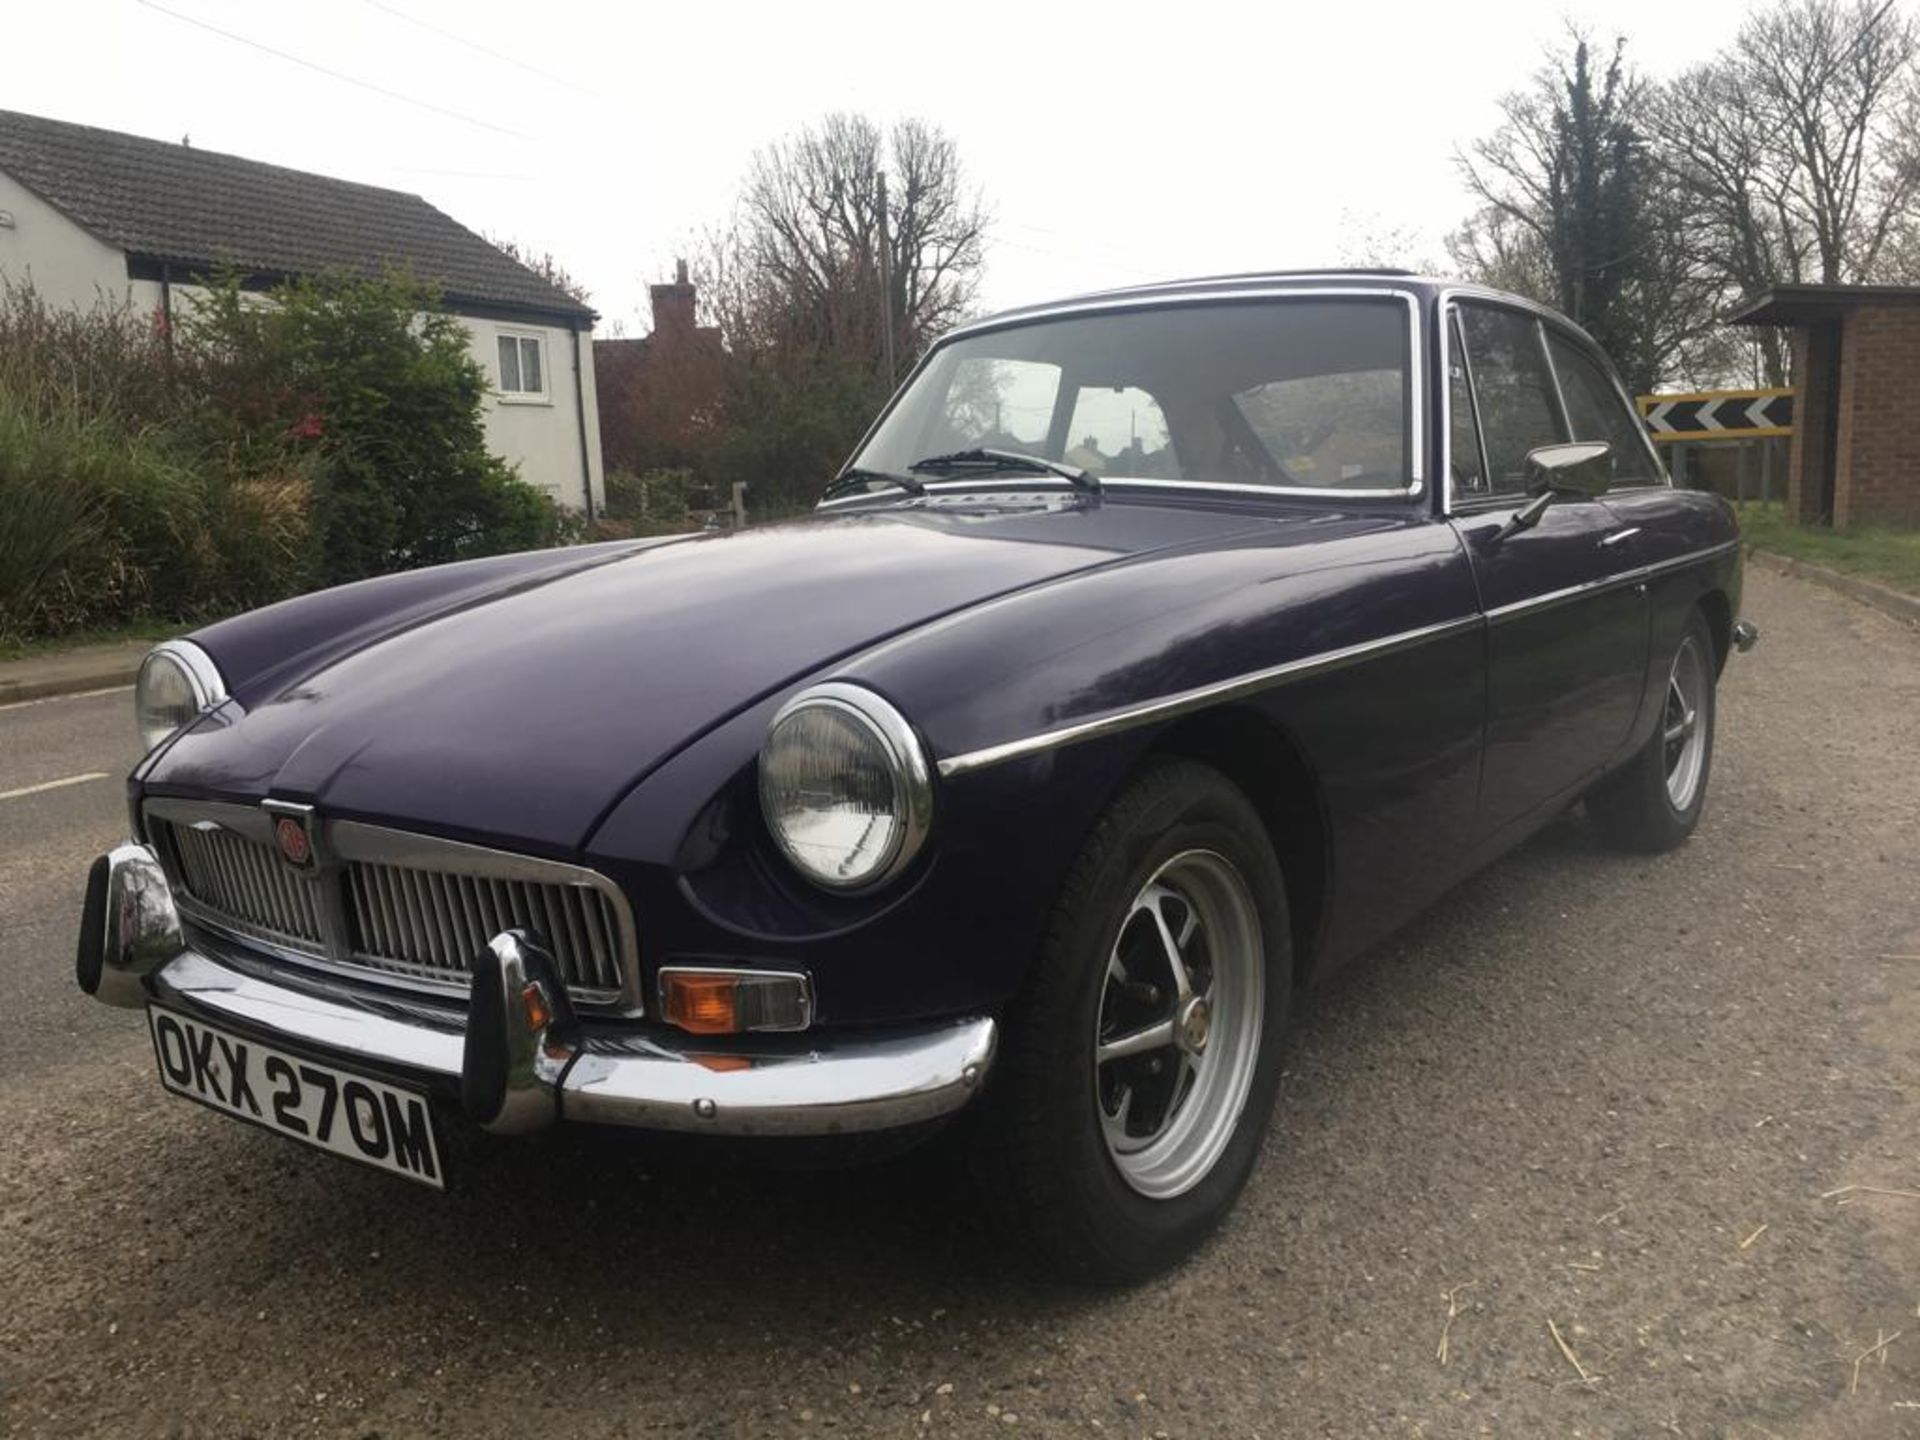 1974 MG B GT COUPE - Image 7 of 22